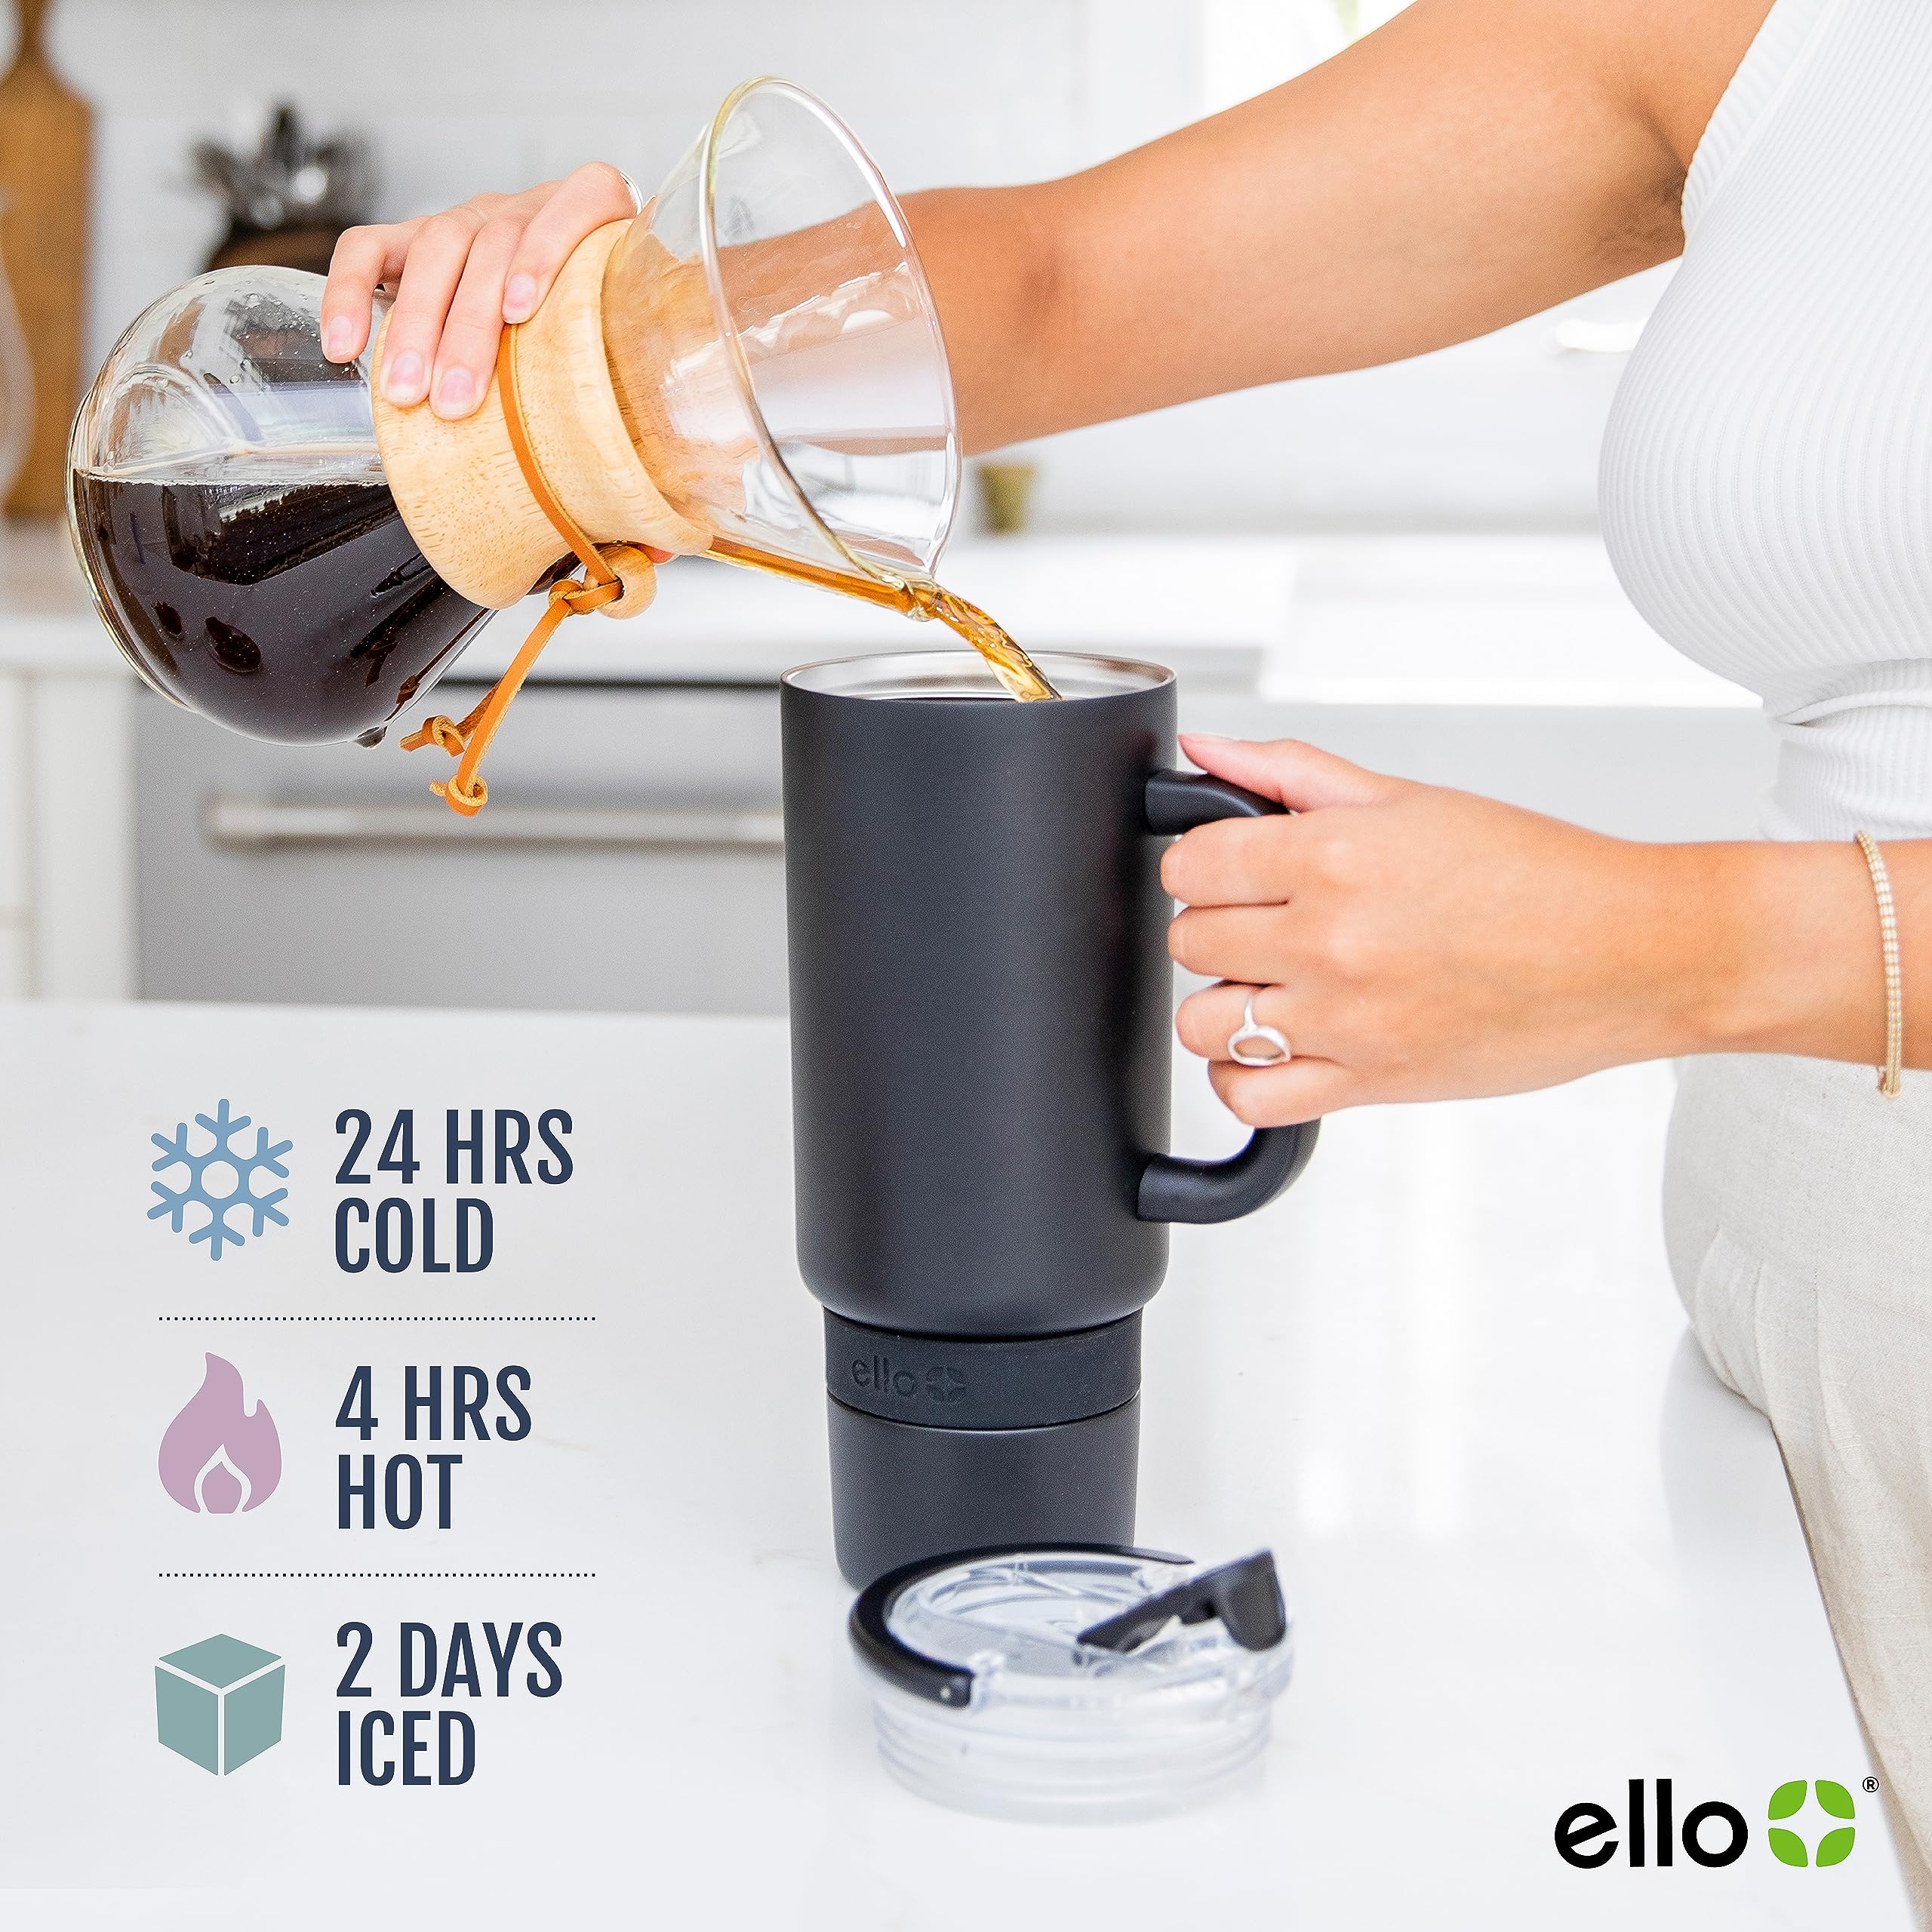 Ello Port 40oz Tumbler with Carry Loop & Integrated Handle, Vacuum Insulated Stainless Steel Reusable Water Bottle, Travel Mug with Leak Proof Lid & Straw, Perfect for Iced Coffee & Tea, Lilac